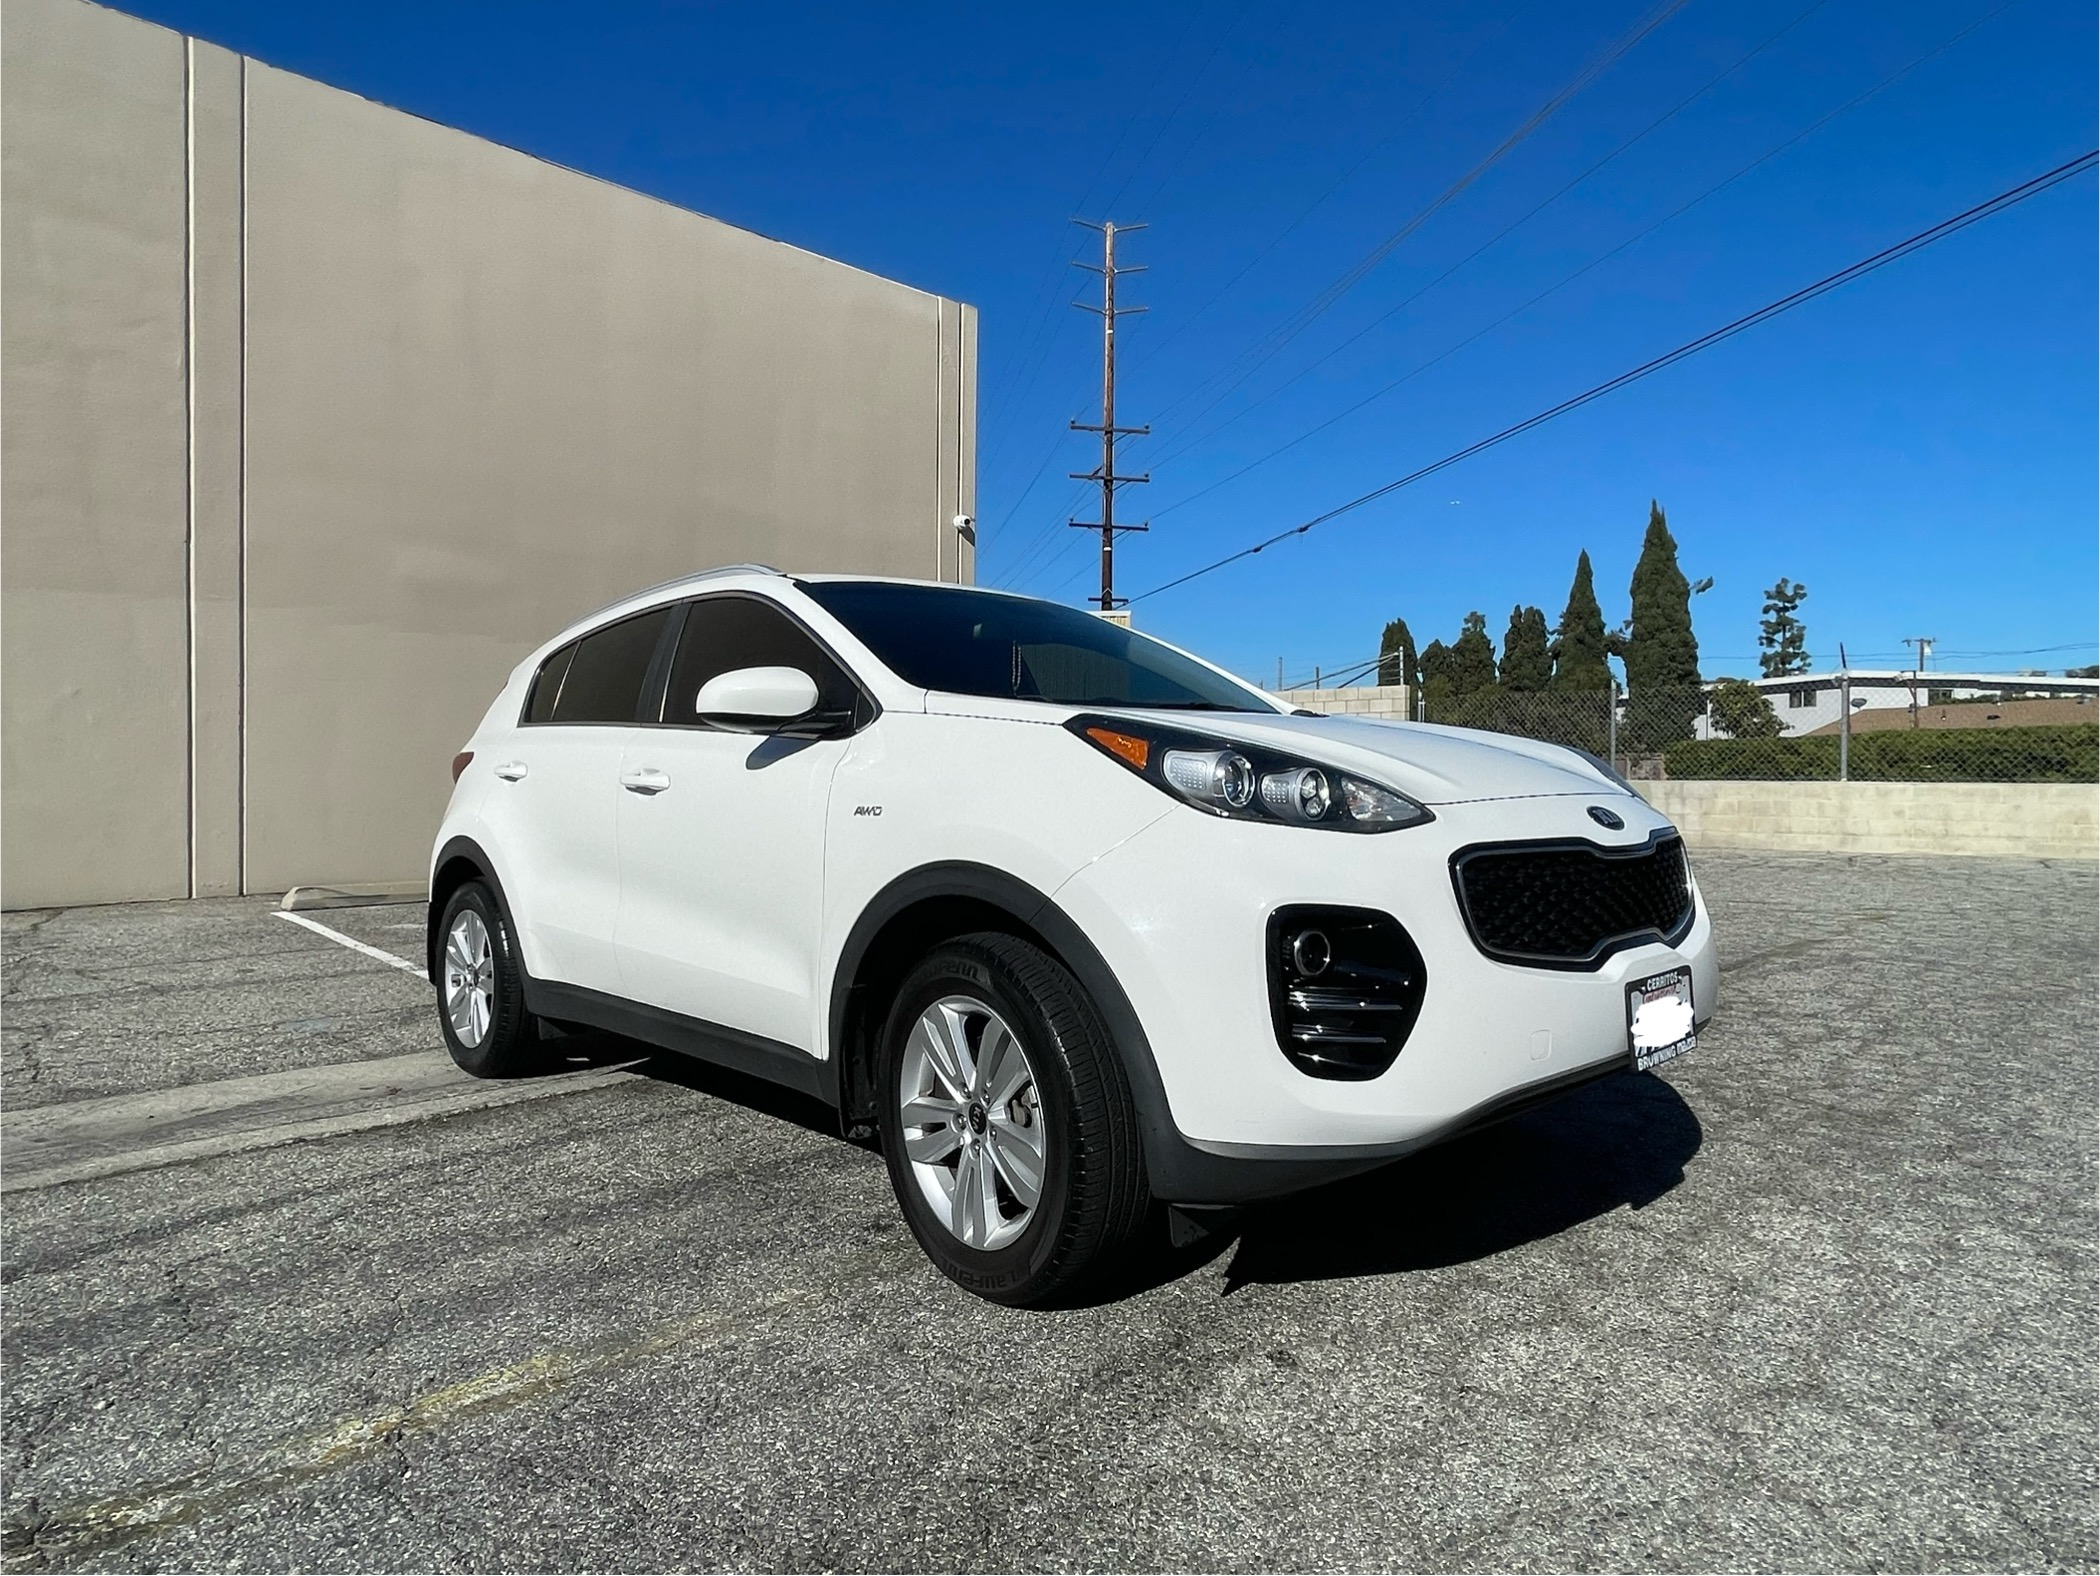 Used Kia Sportage for Sale Under $15,000 (Test Drive at Home) - Kelley Blue  Book